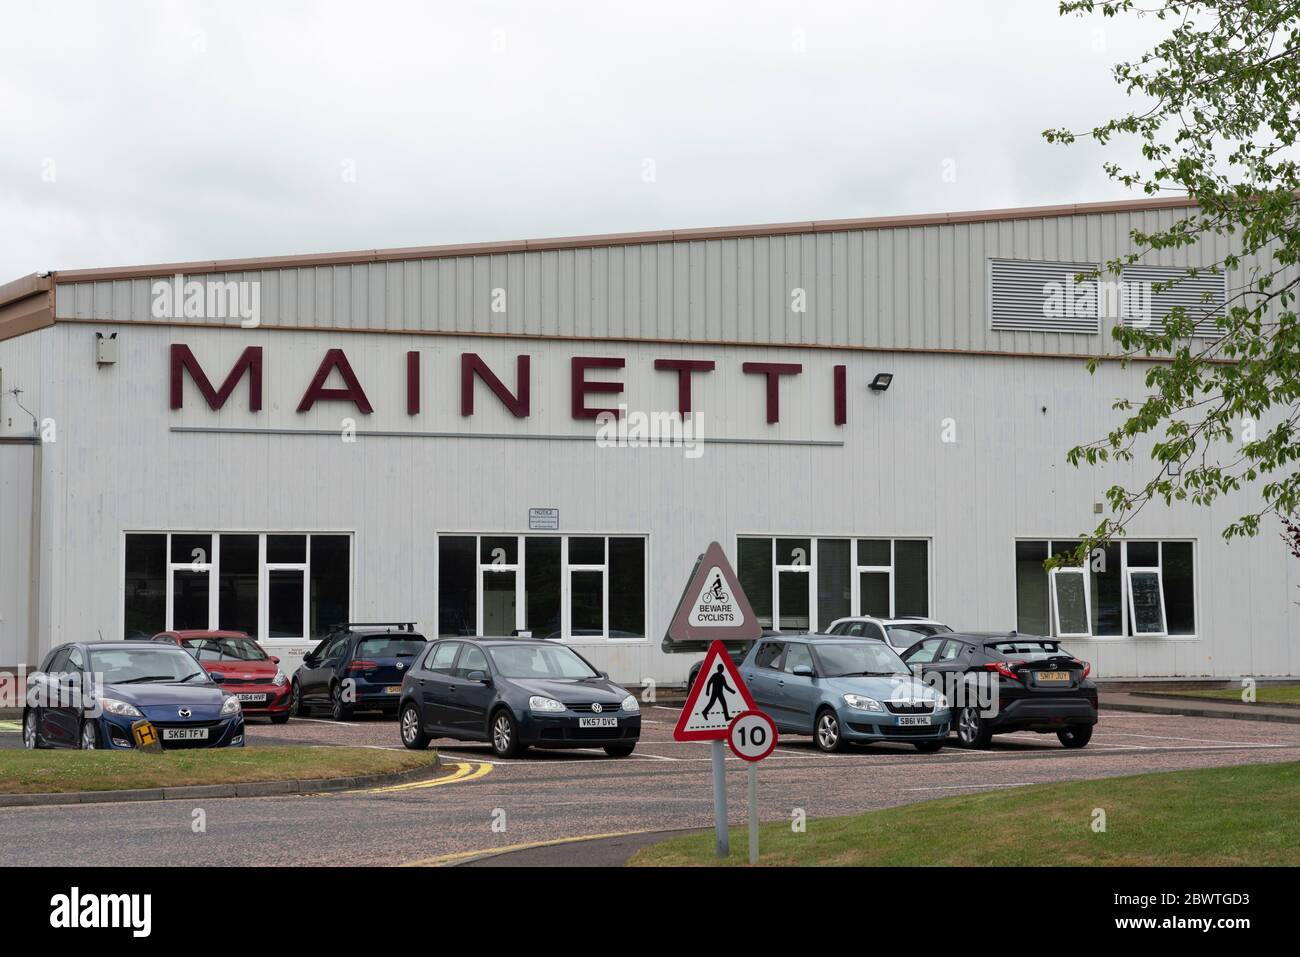 Jedburgh, Scotland, UK. 3 June 2020. The Scottish borders town of Jedburgh is facing a double blow with announcement of the closure of two factories in the town. Mainetti, the coat hanger maker and LS Starrett, which makes tools and other components, both announced that they are closing their factories and transferring manufacturing to other plants. About 100 workers at each factory are facing redundancy. Pictured; Mainetti factory exterior. Iain Masterton/Alamy Live News Stock Photo